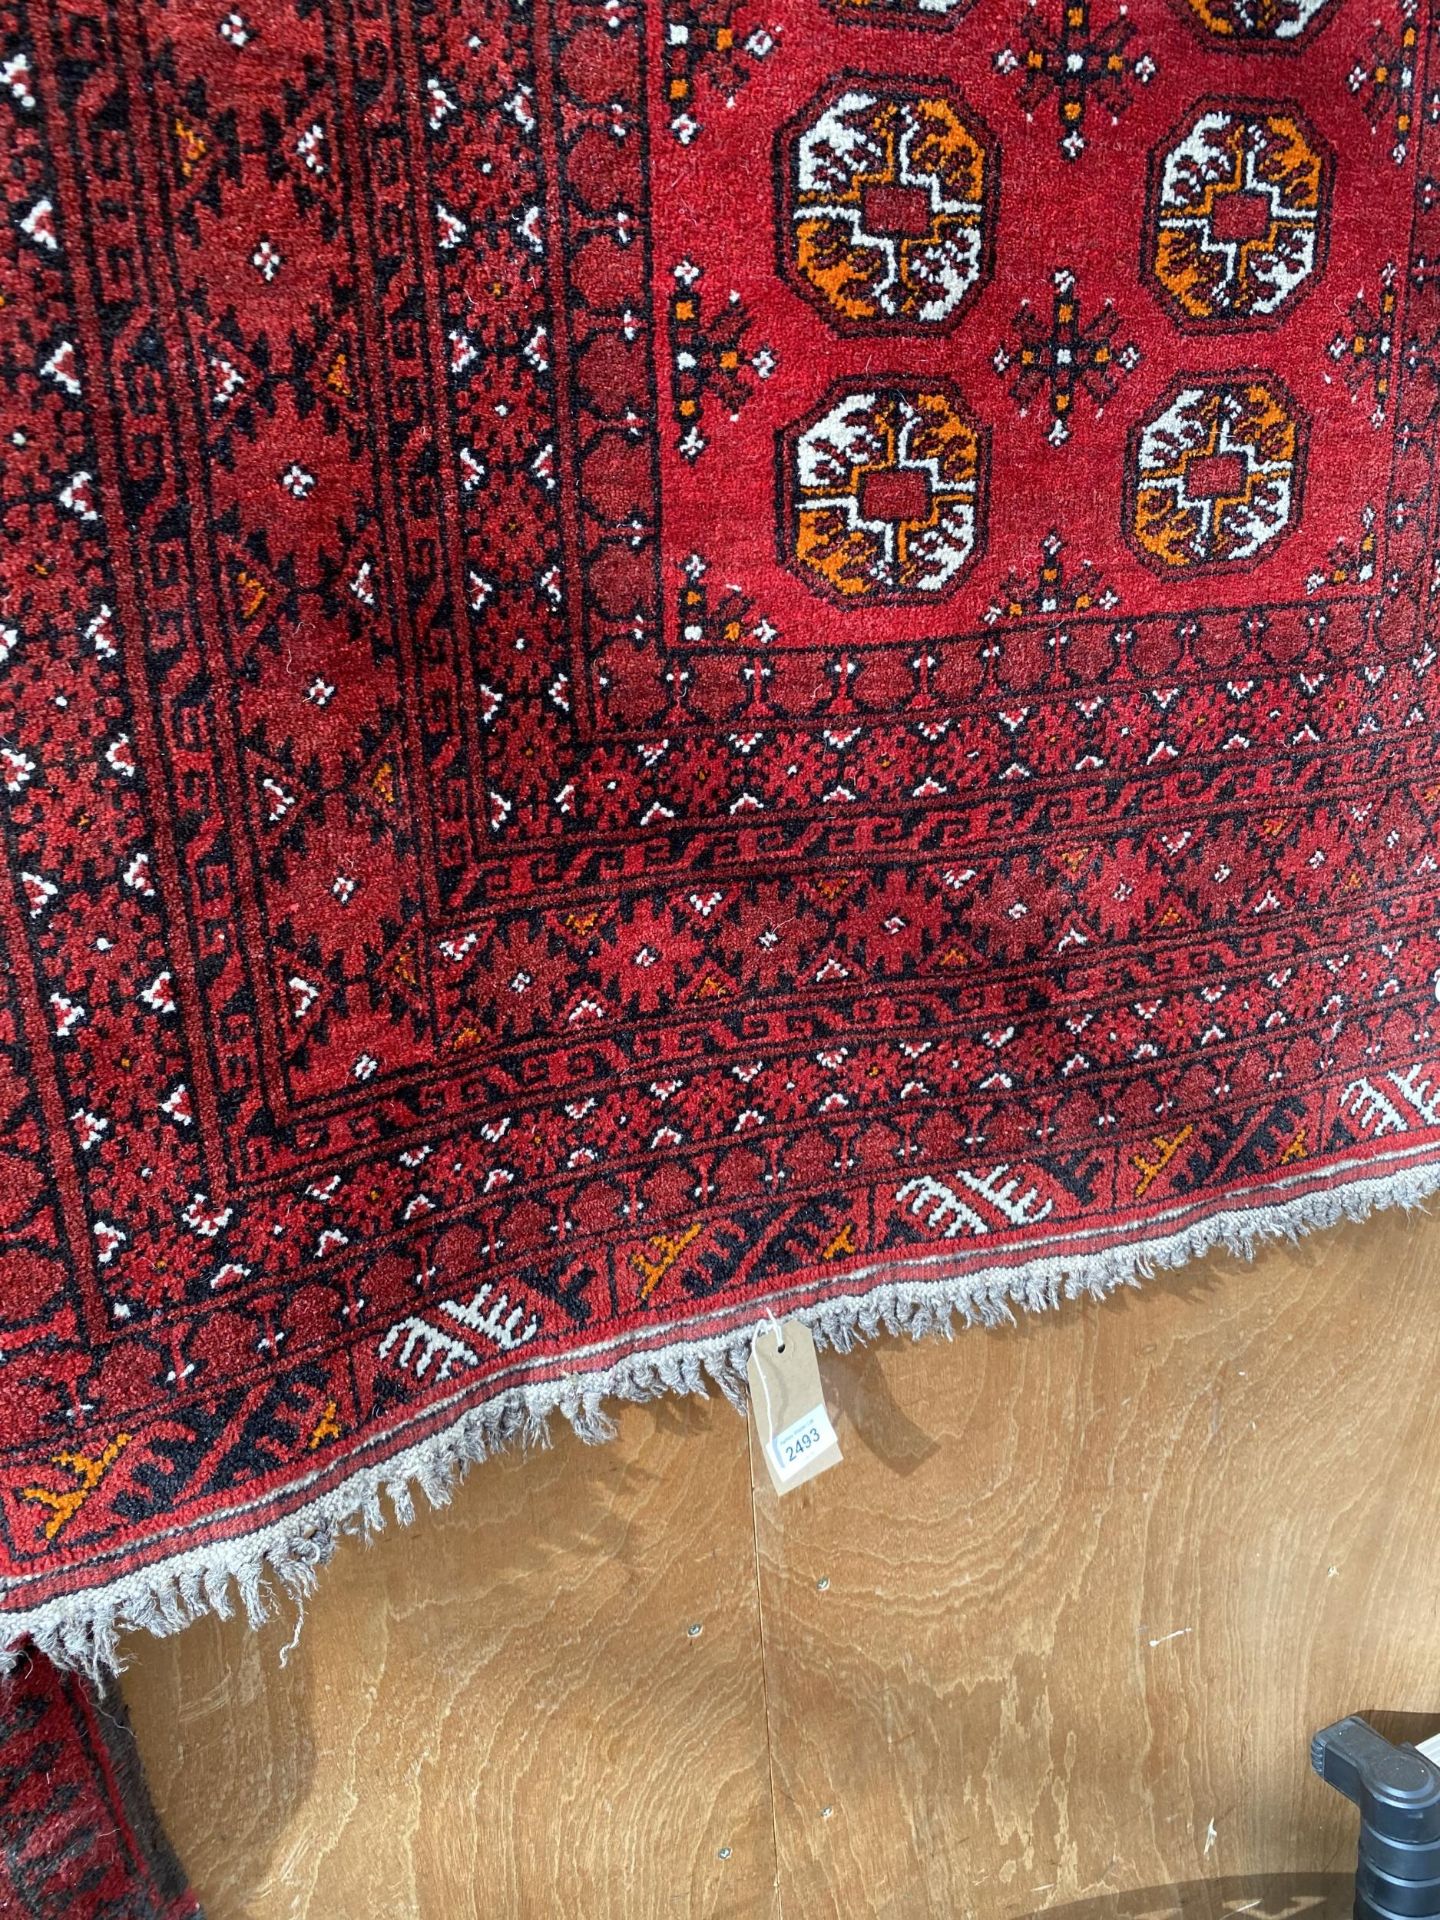 A RED PATTERNED FRINGED RUG (208CM x 102CM) - Image 3 of 3